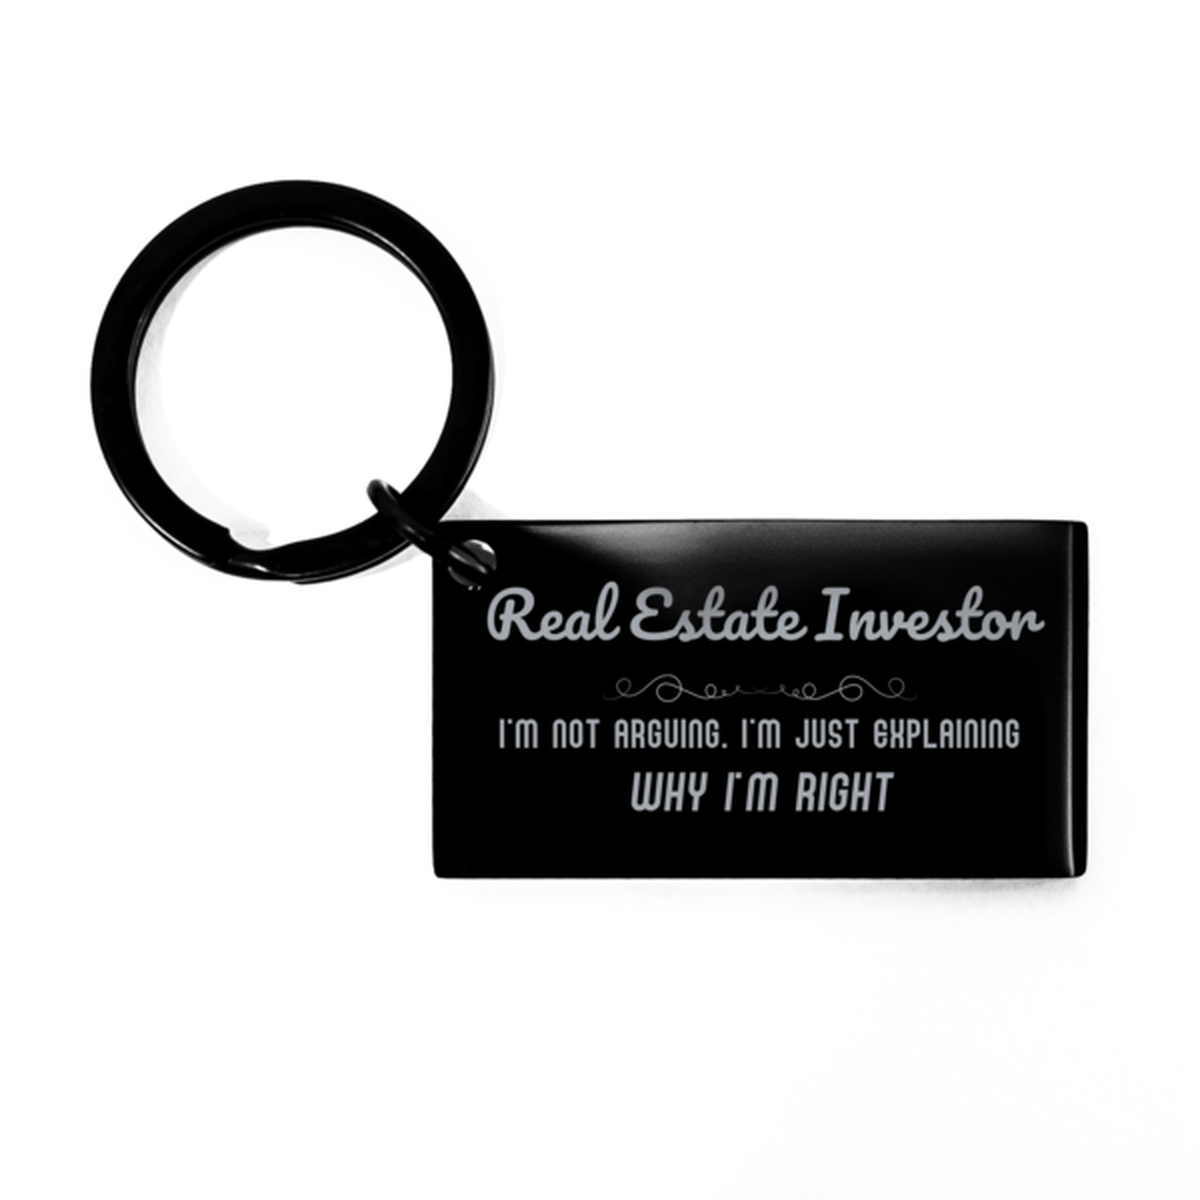 Real Estate Investor I'm not Arguing. I'm Just Explaining Why I'm RIGHT Keychain, Funny Saying Quote Real Estate Investor Gifts For Real Estate Investor Graduation Birthday Christmas Gifts for Men Women Coworker